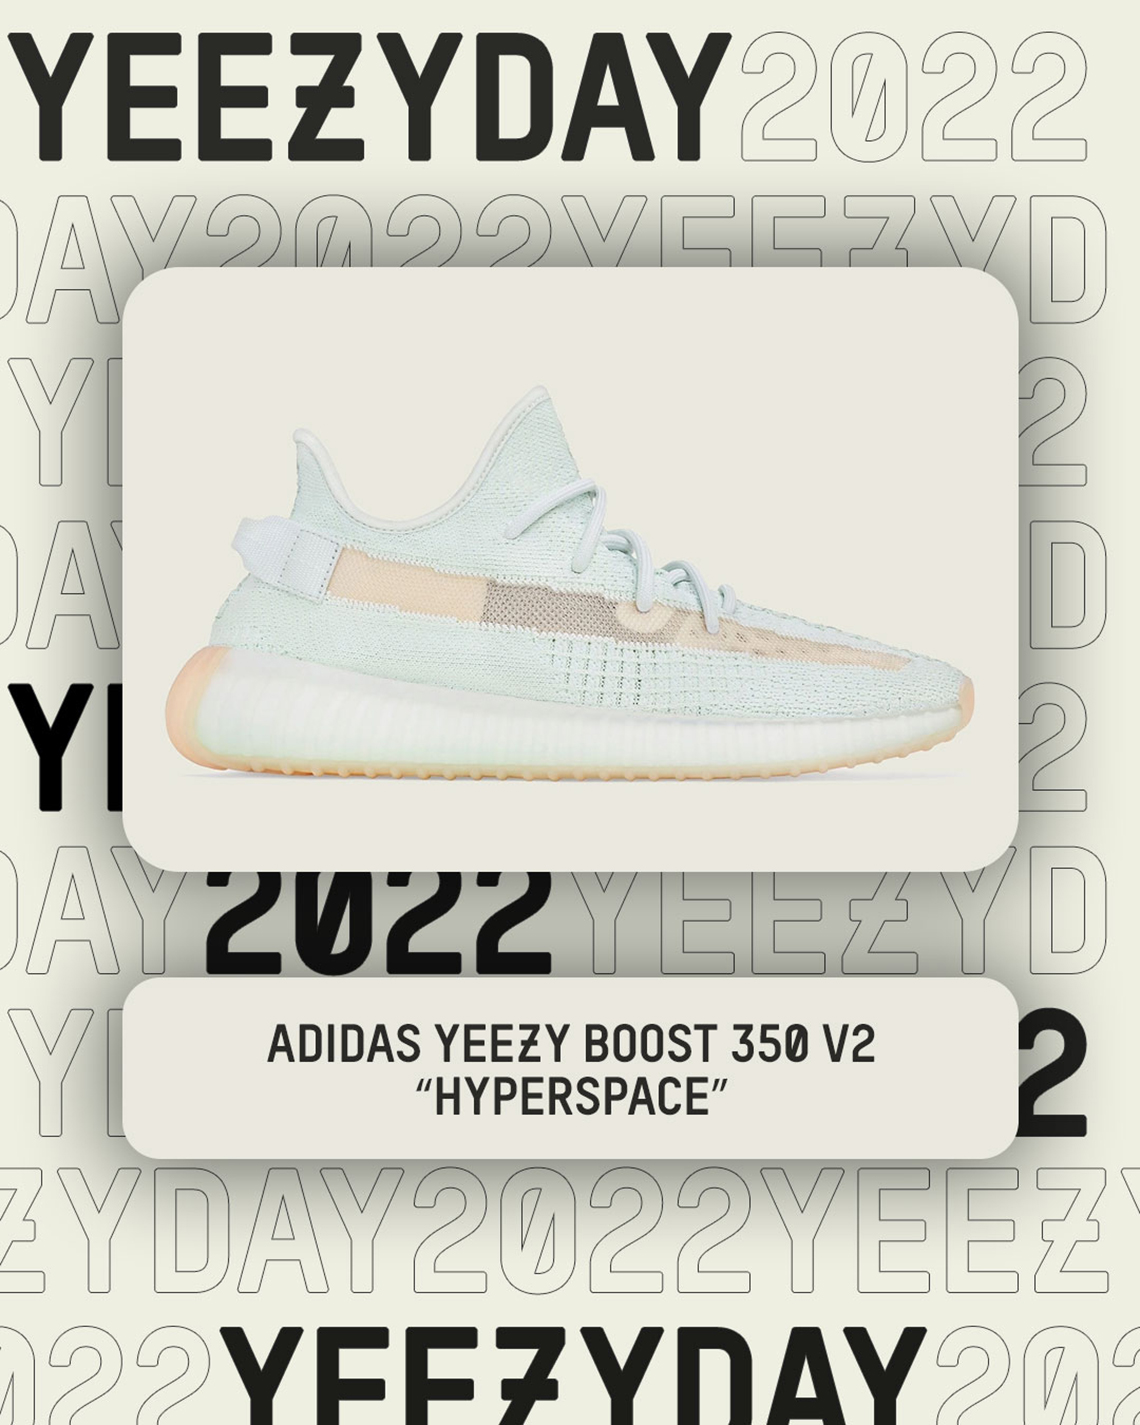 Yeezy Day 2022 Yeezy Boost 350 V2 Hyperspace